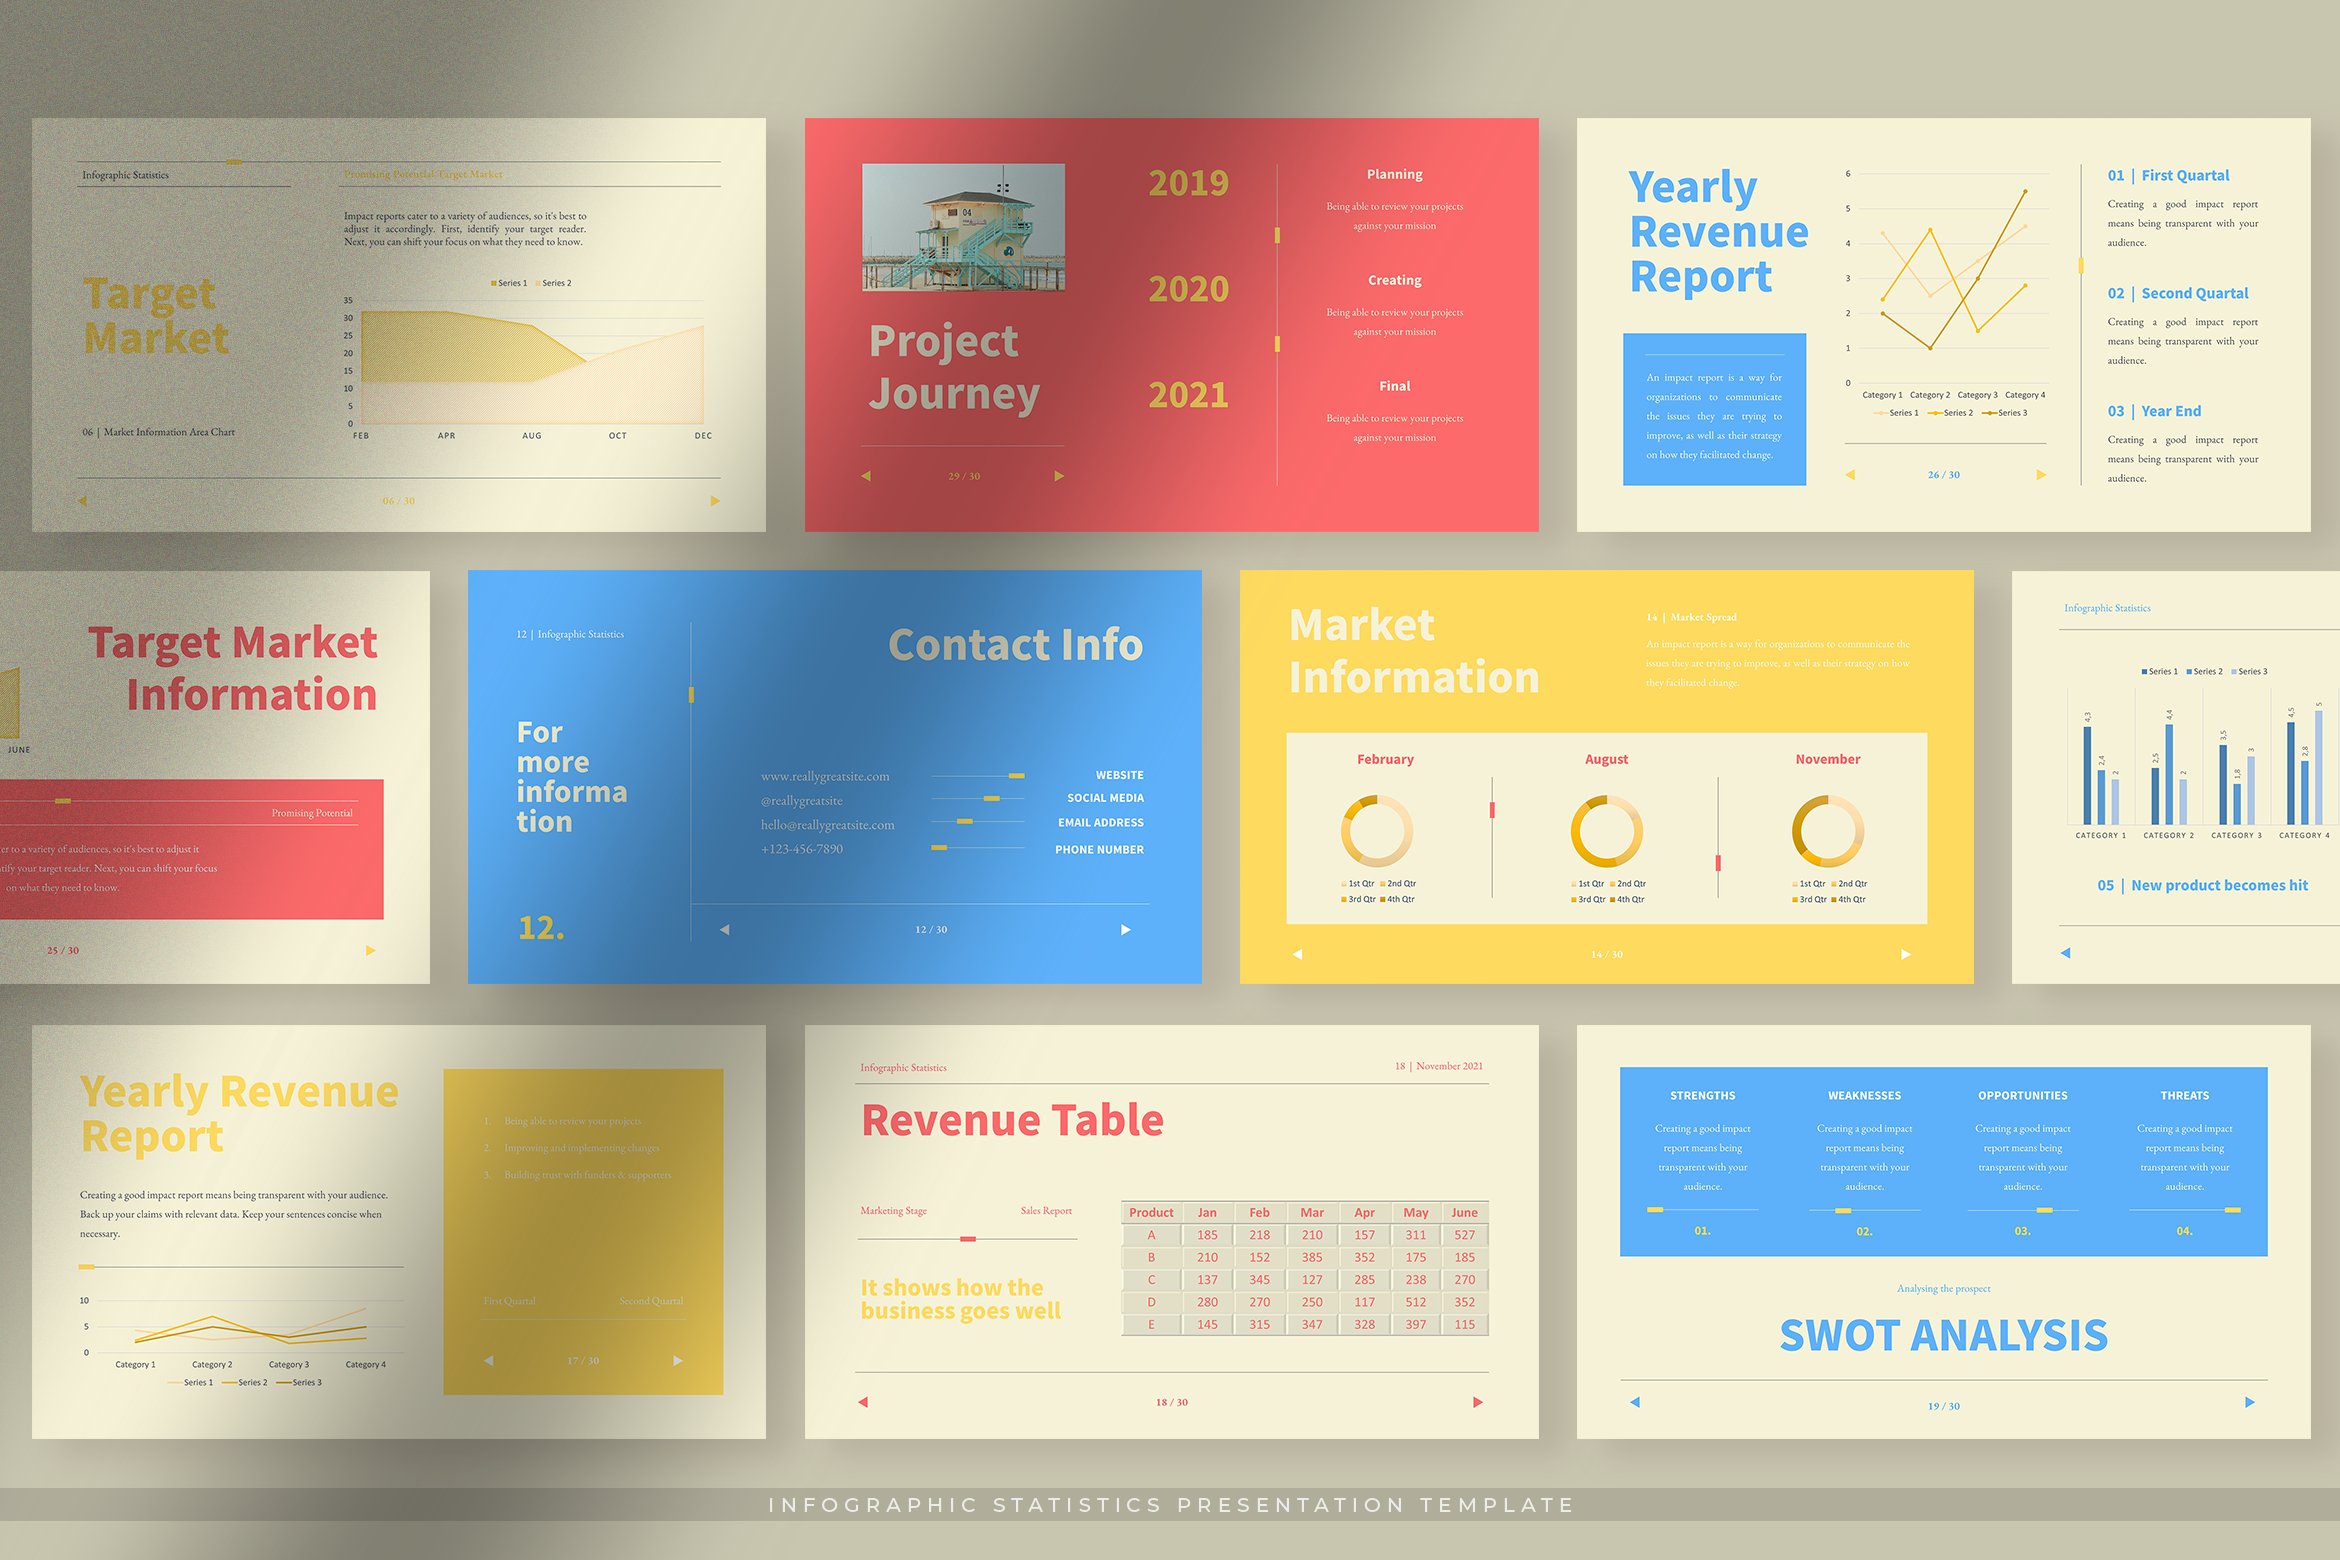 Colorful template for funny presentation.